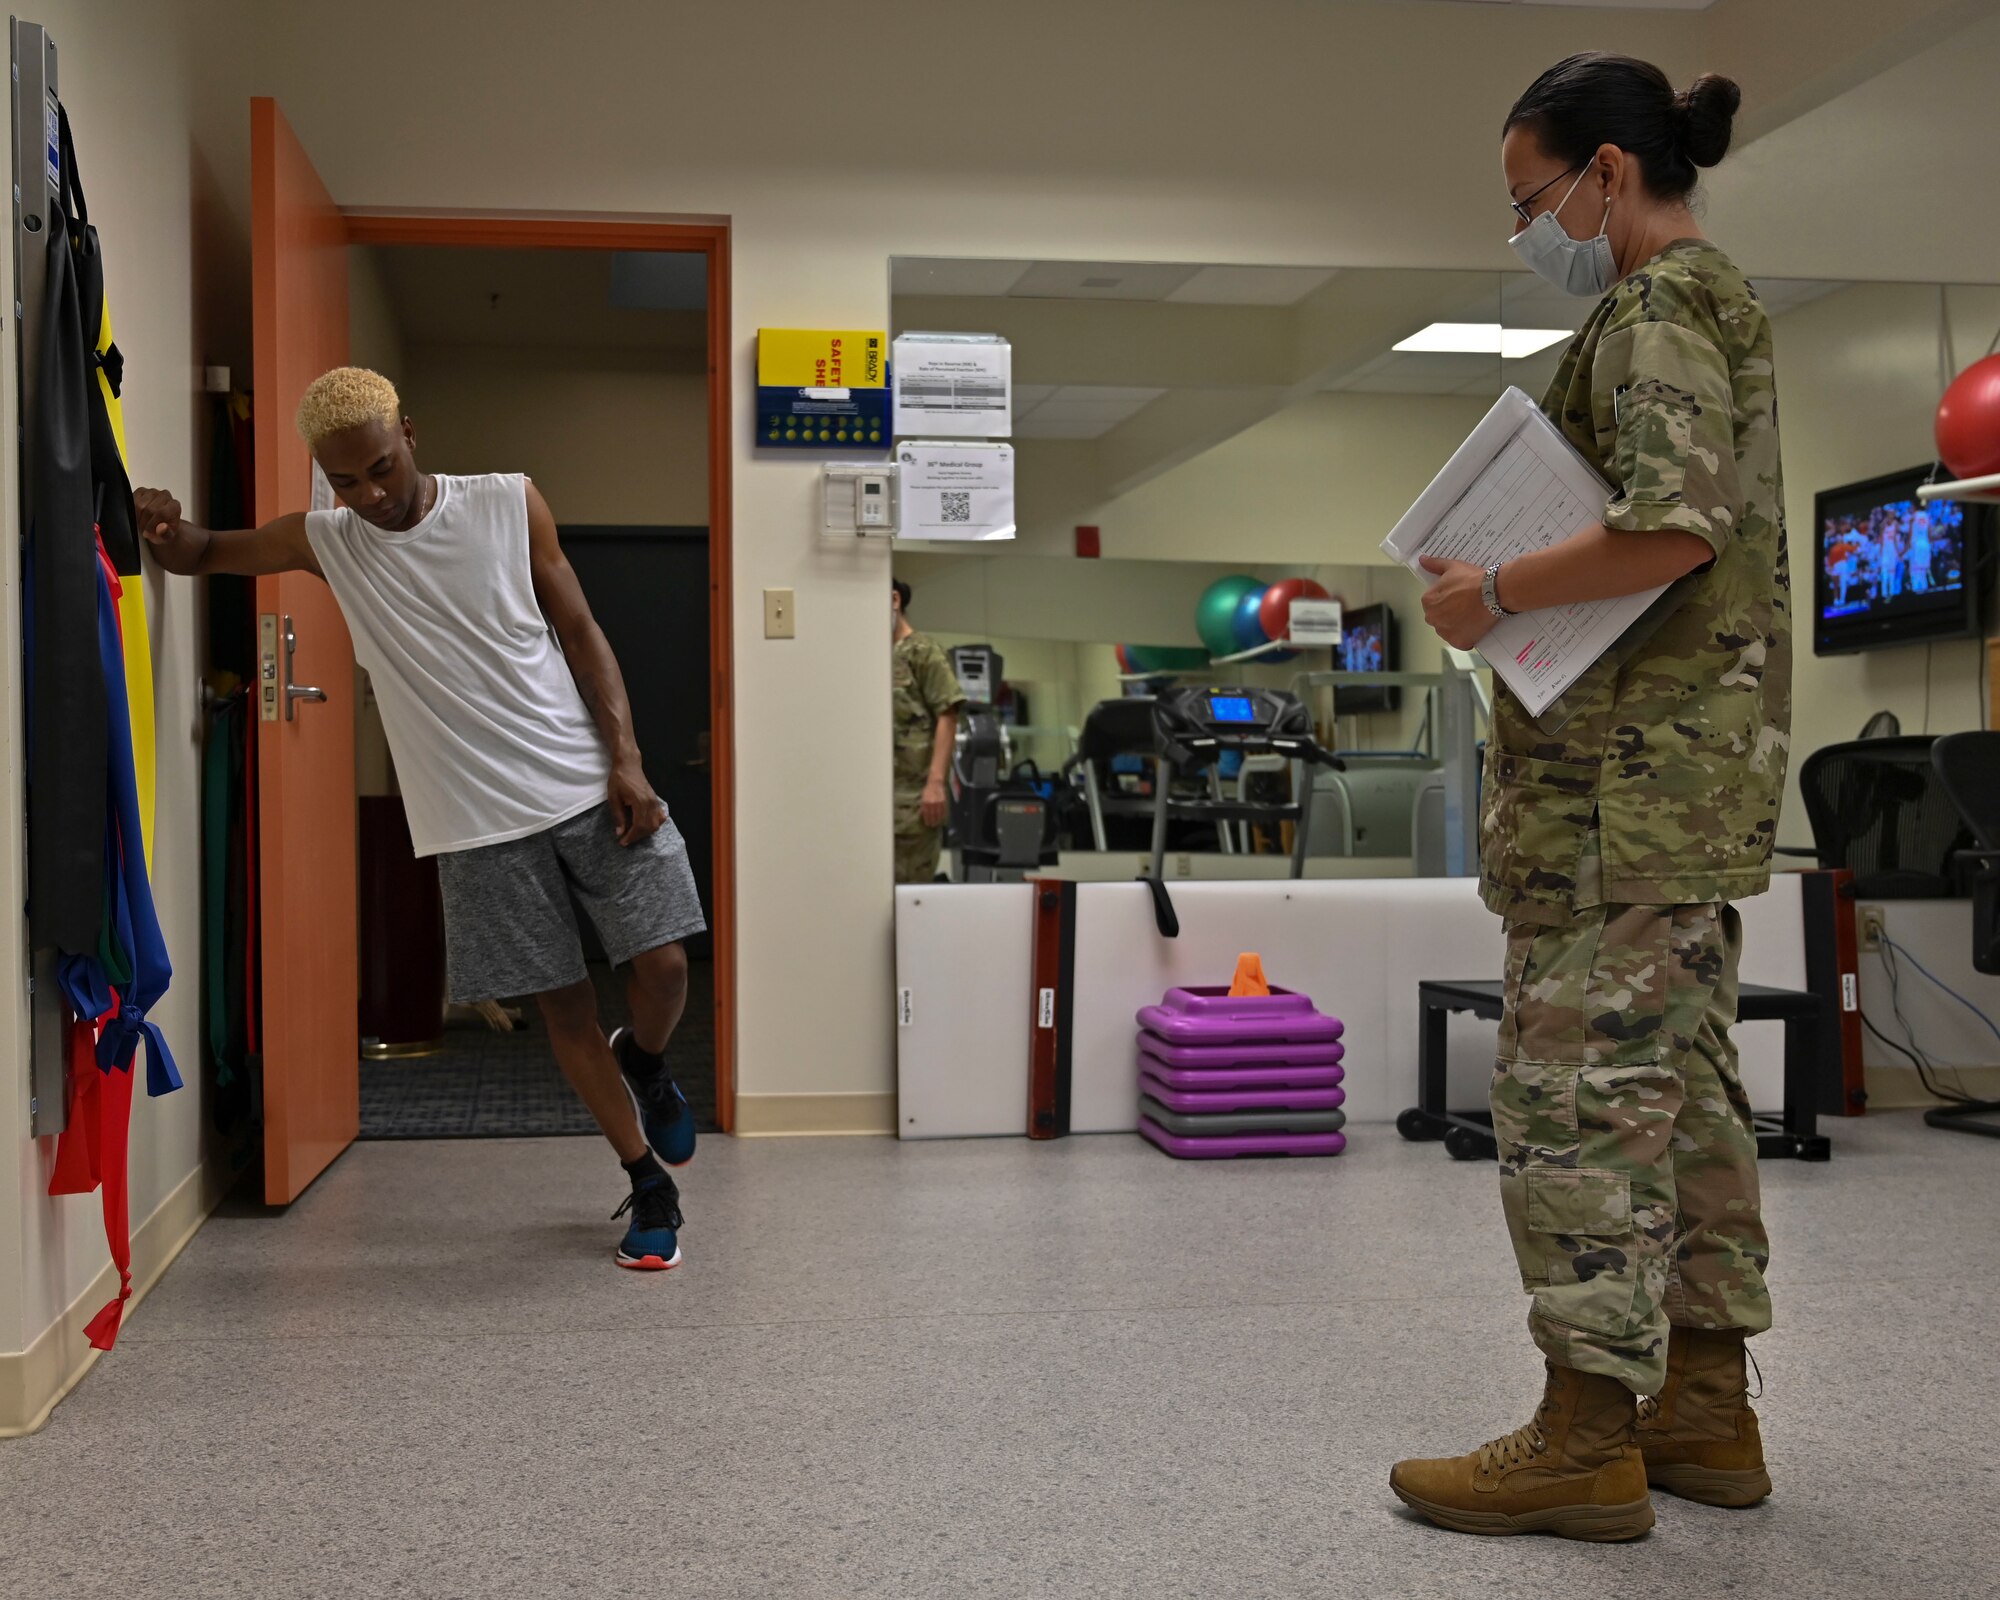 U.S. Air Force Staff Sgt. Monica Rivera, 36th Medical Group Physical Therapy Clinic noncommissioned officer in charge, watches a patient perform eccentric heel raises at the PT Clinic on Andersen Air Force Base, Guam, Sept. 7, 2022. This exercise helps strengthen calf muscles and reduces tension on the achilles tendon. (U.S. Air Force photo by Airman 1st Class Lauren Clevenger)